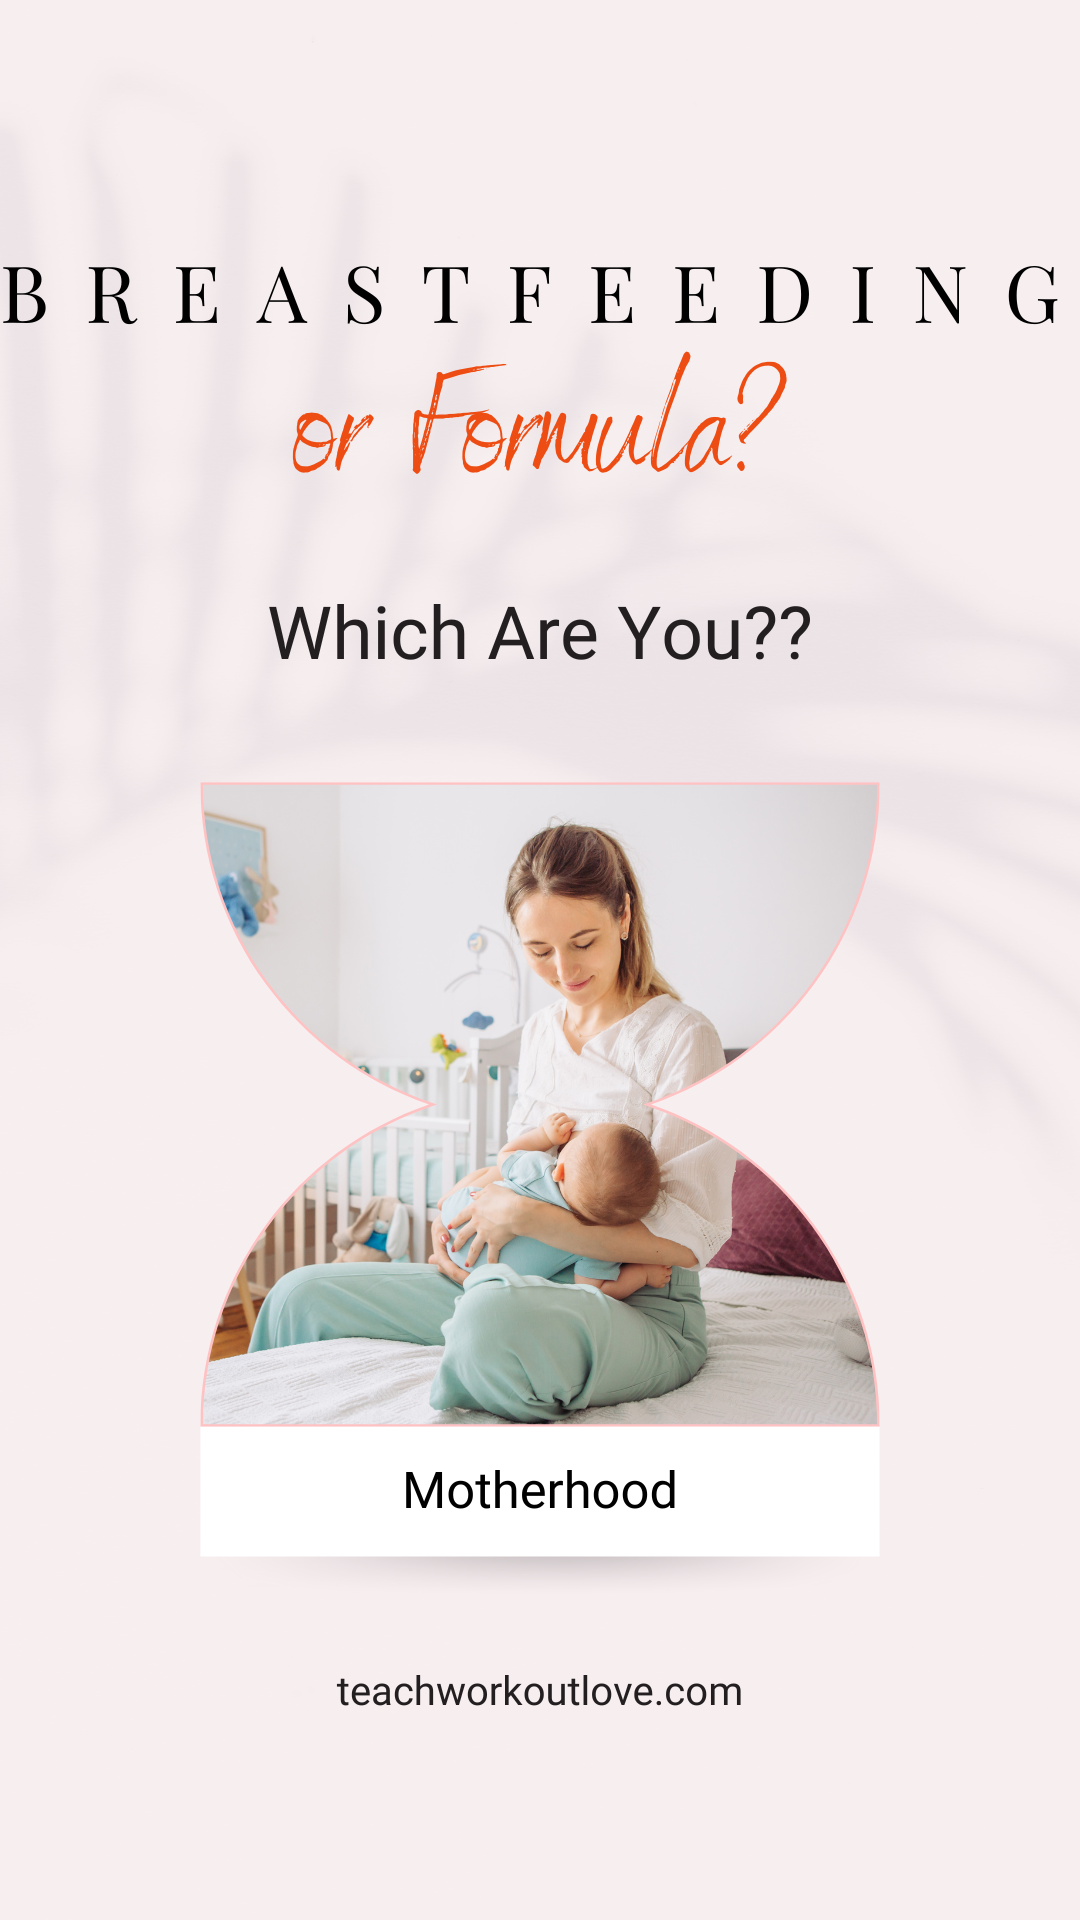 Let's talk about feeding first. Whether breastfeeding, pumping or using formula, feeding takes up a big chunk of your day. It's like a full-time job, inside a full-time job, on top of a full-time job. Are you following? But here's the thing, you can turn feeding time into workout time. 